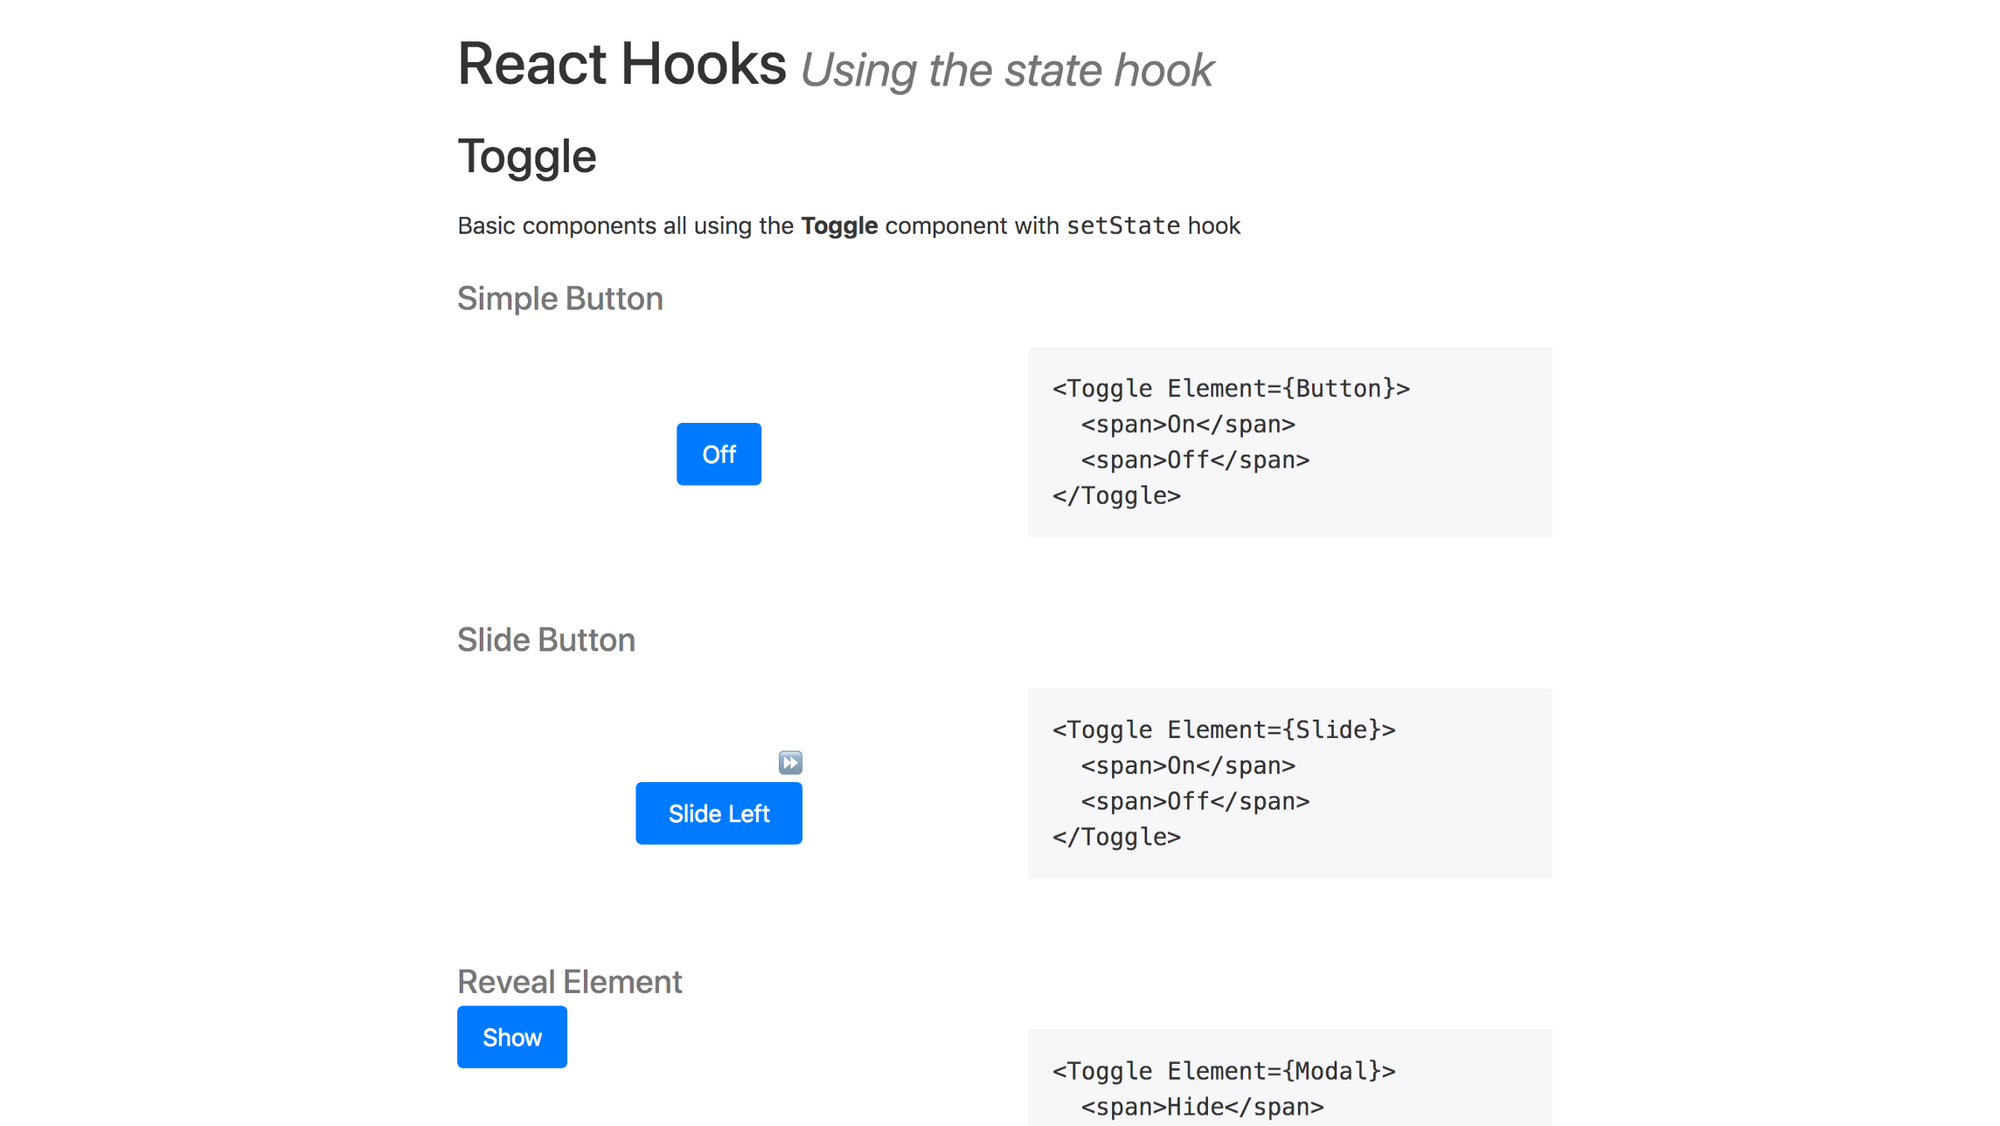 Webpage with the title "Reach Hooks"